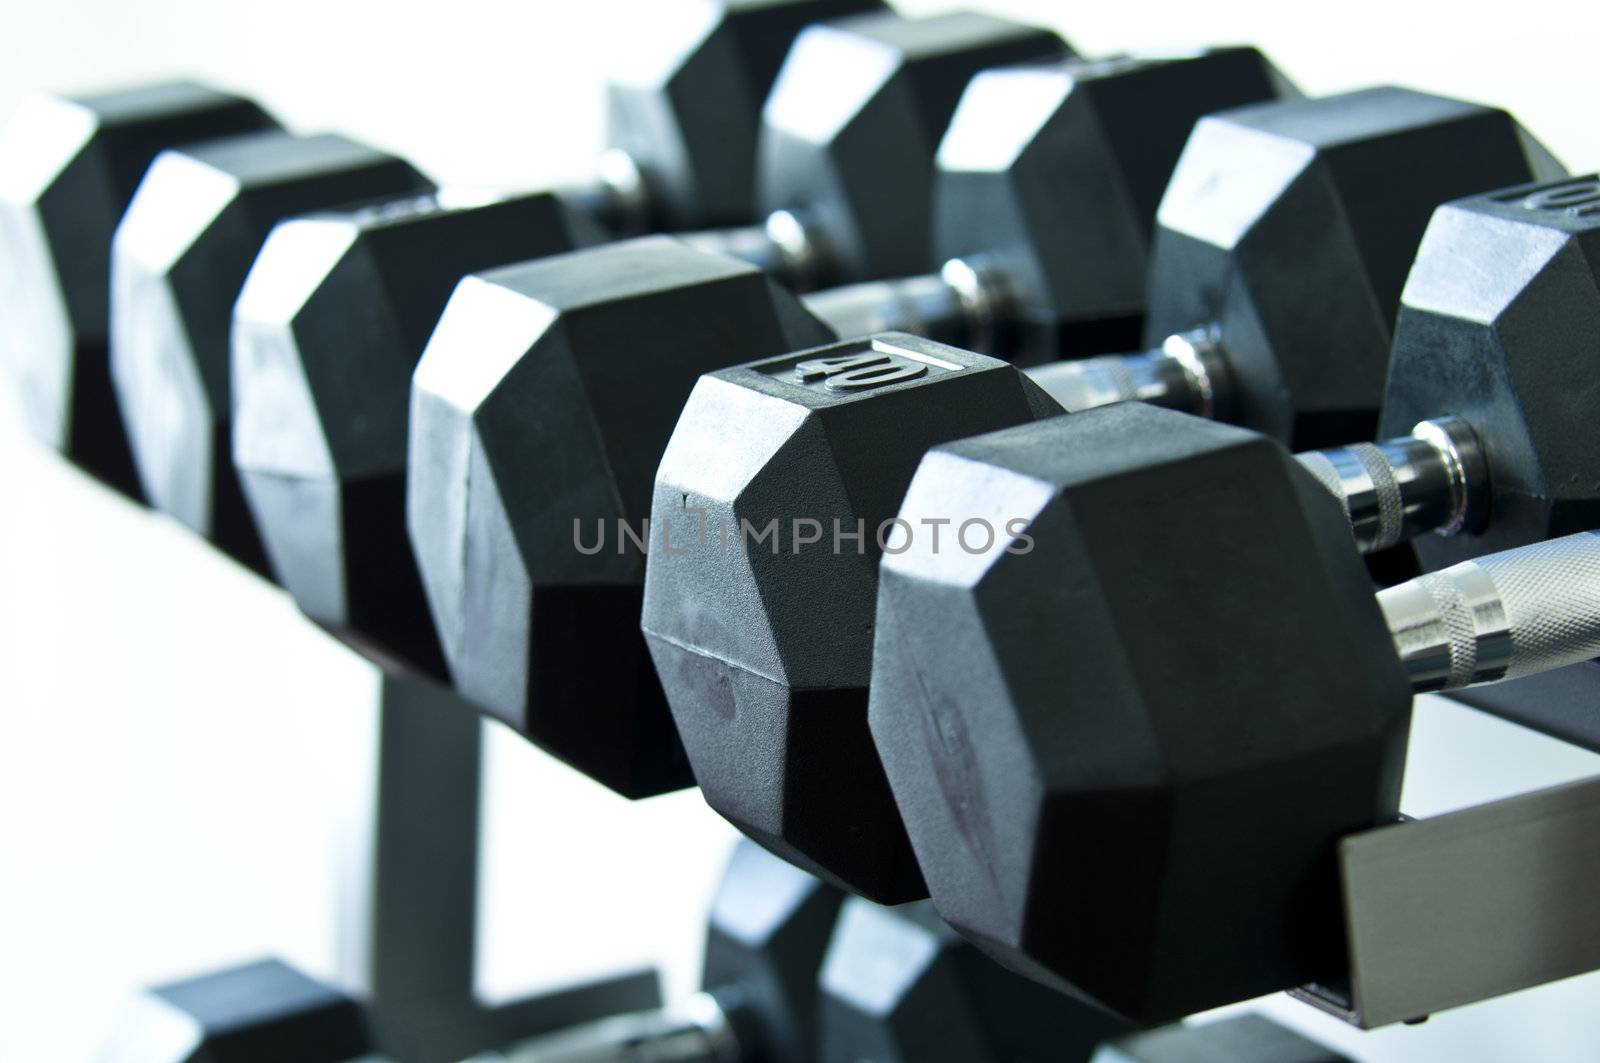 Weights of a gym different sizes and weights black